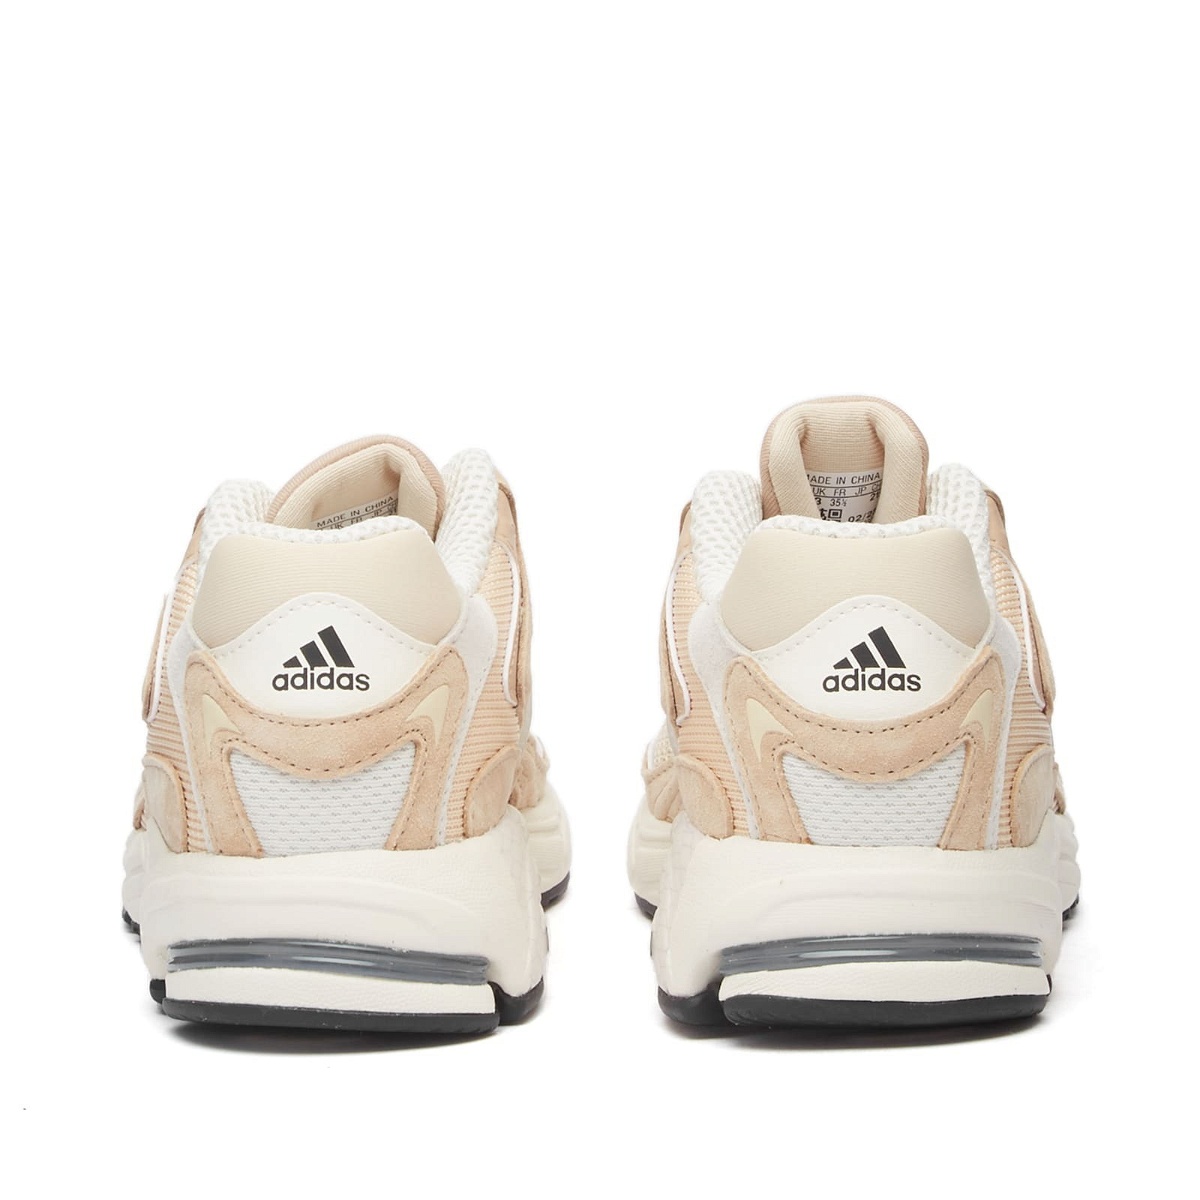 Adidas Response CL Sneakers in Sand/Off White/Beige adidas